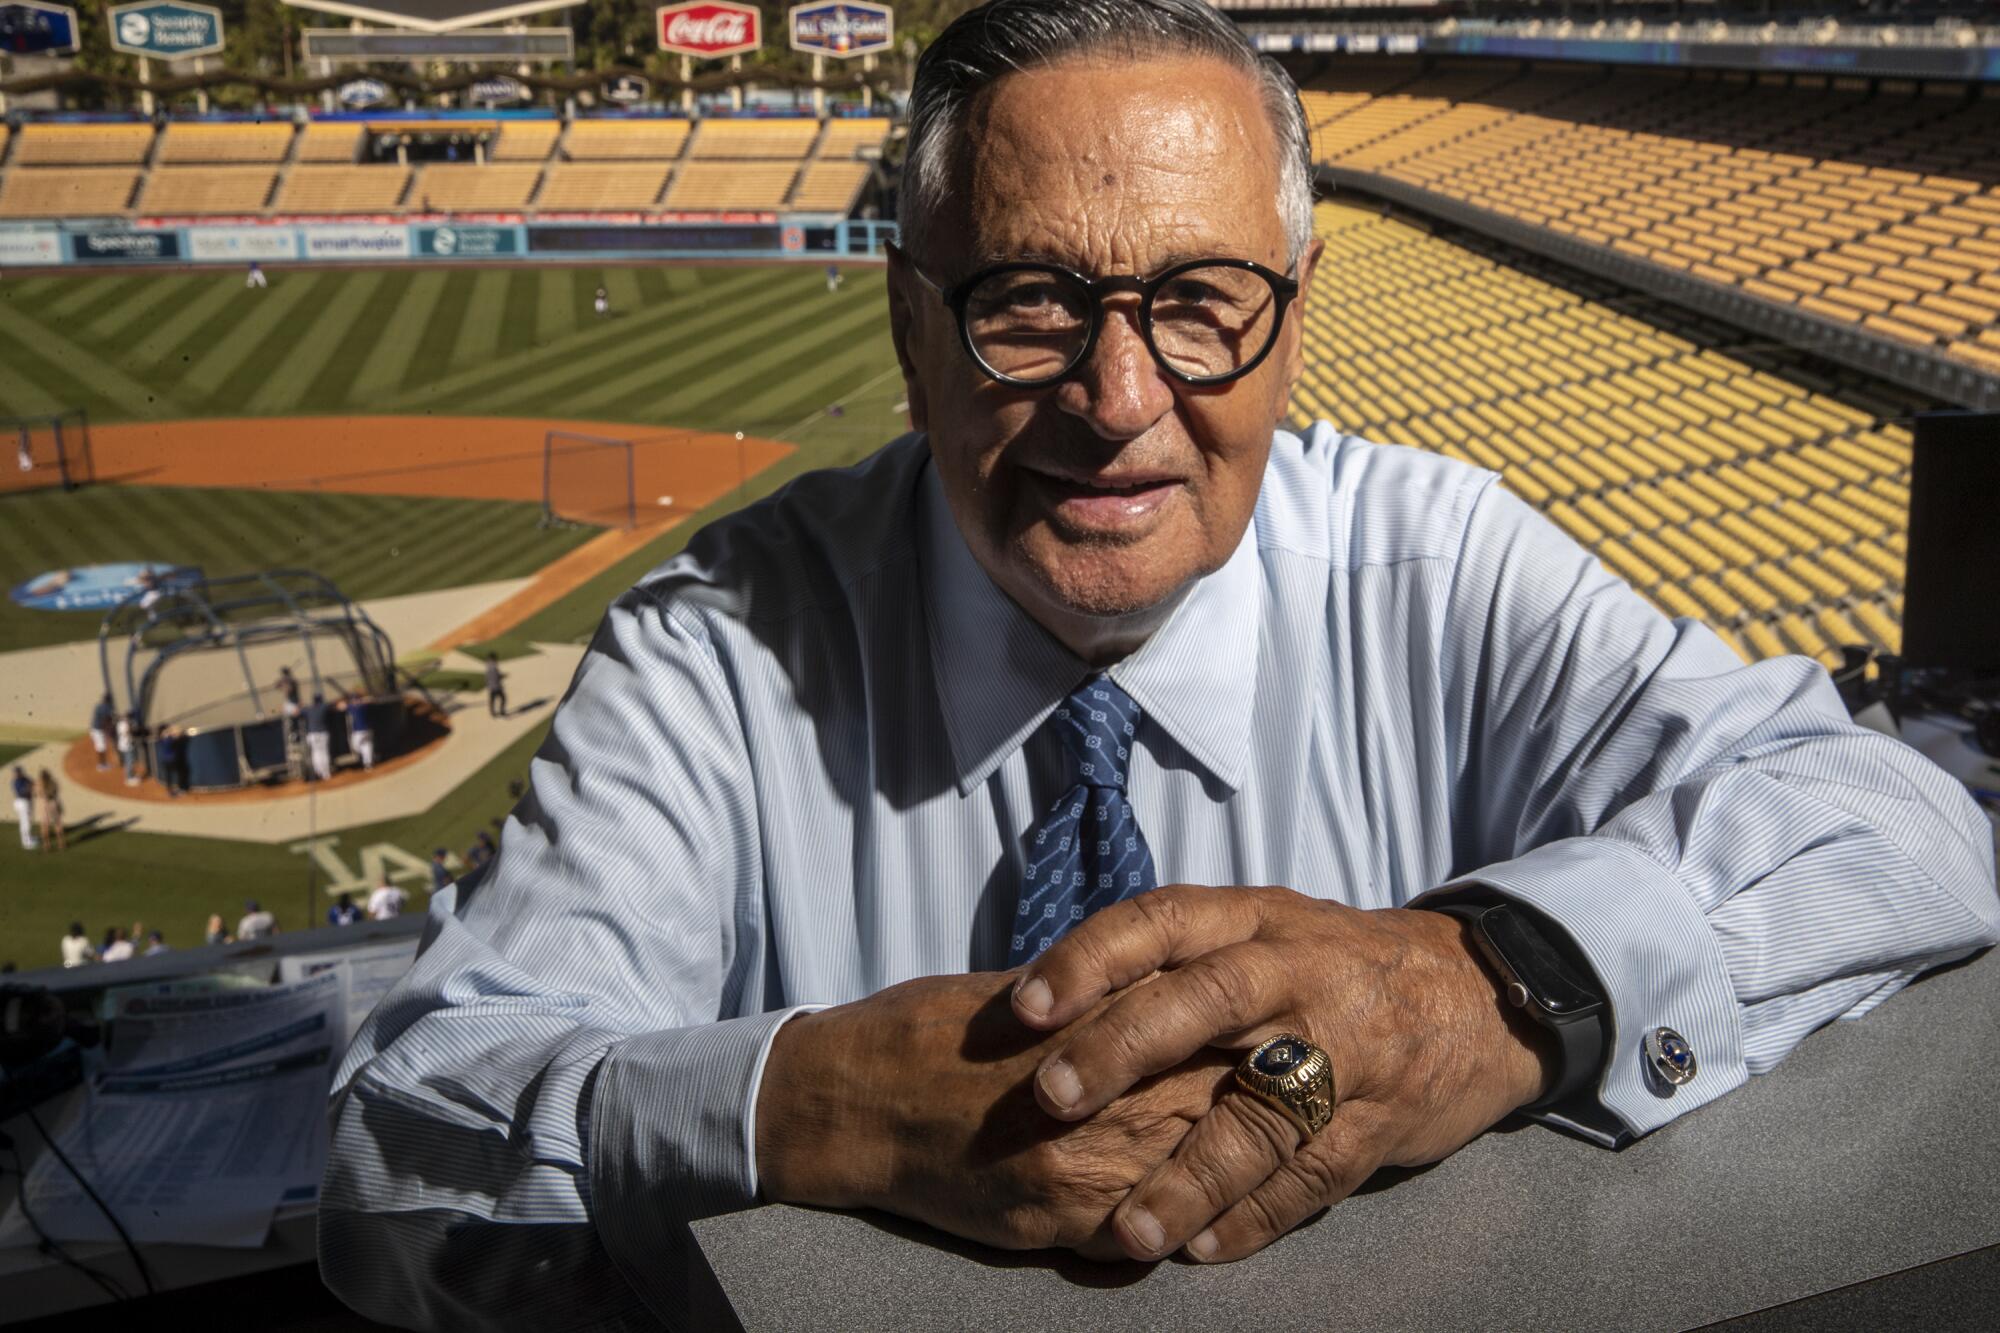 An Insider Peek at Dodger Stadium with Player-Turned-Broadcaster